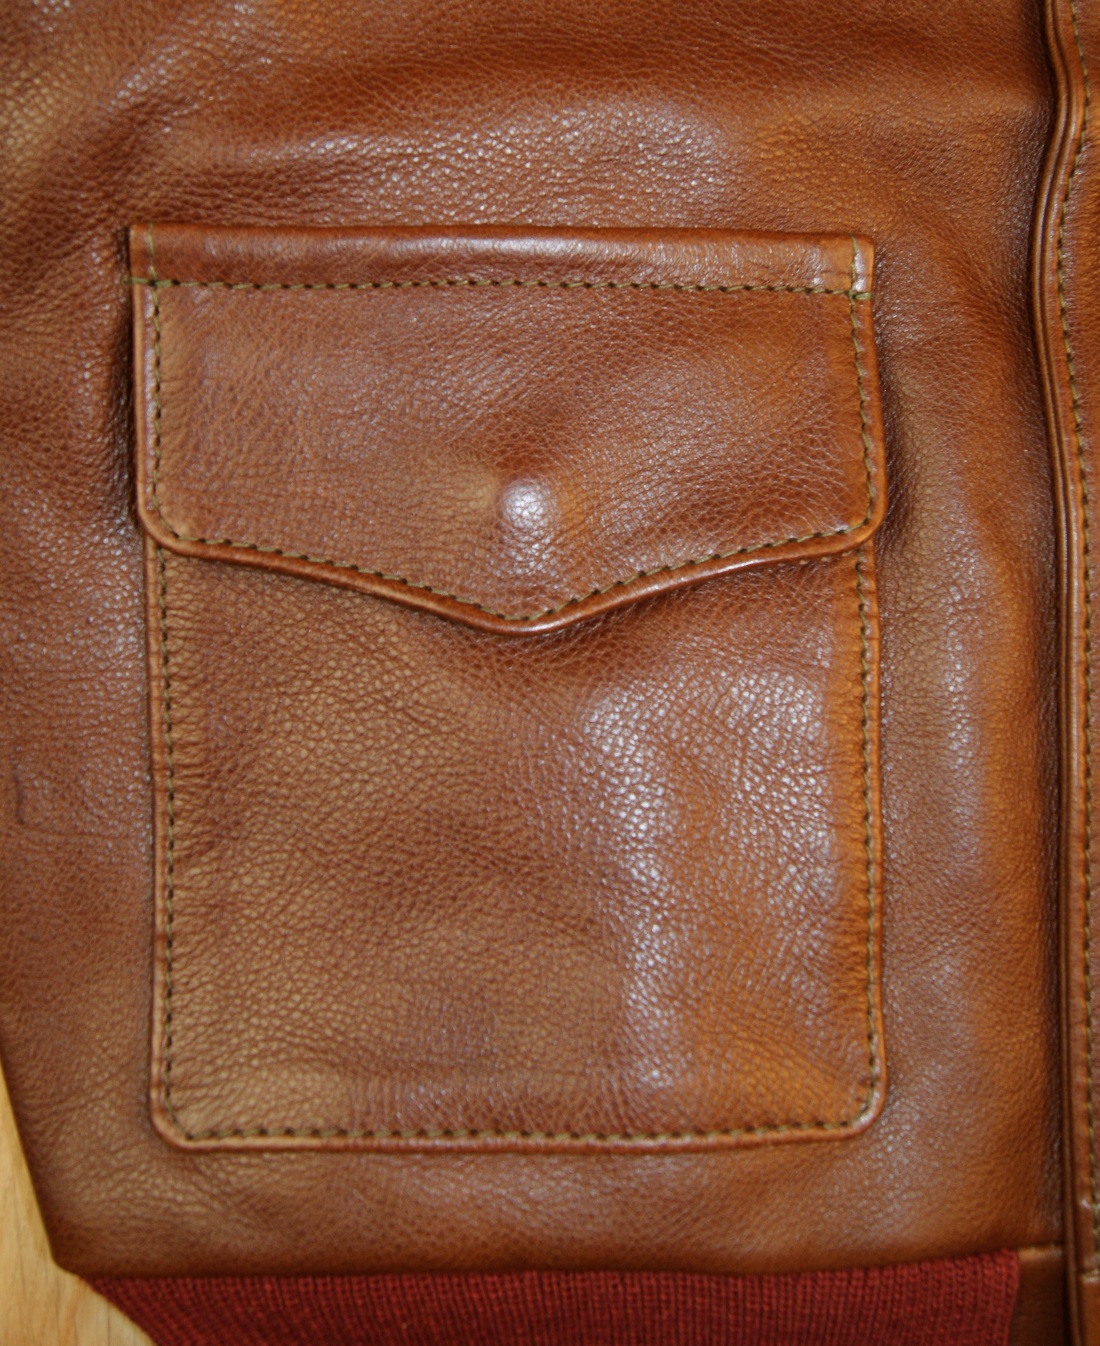 Aero 15142 A-2 Russet Vicenza Horsehide UD4 patch pocket.jpg